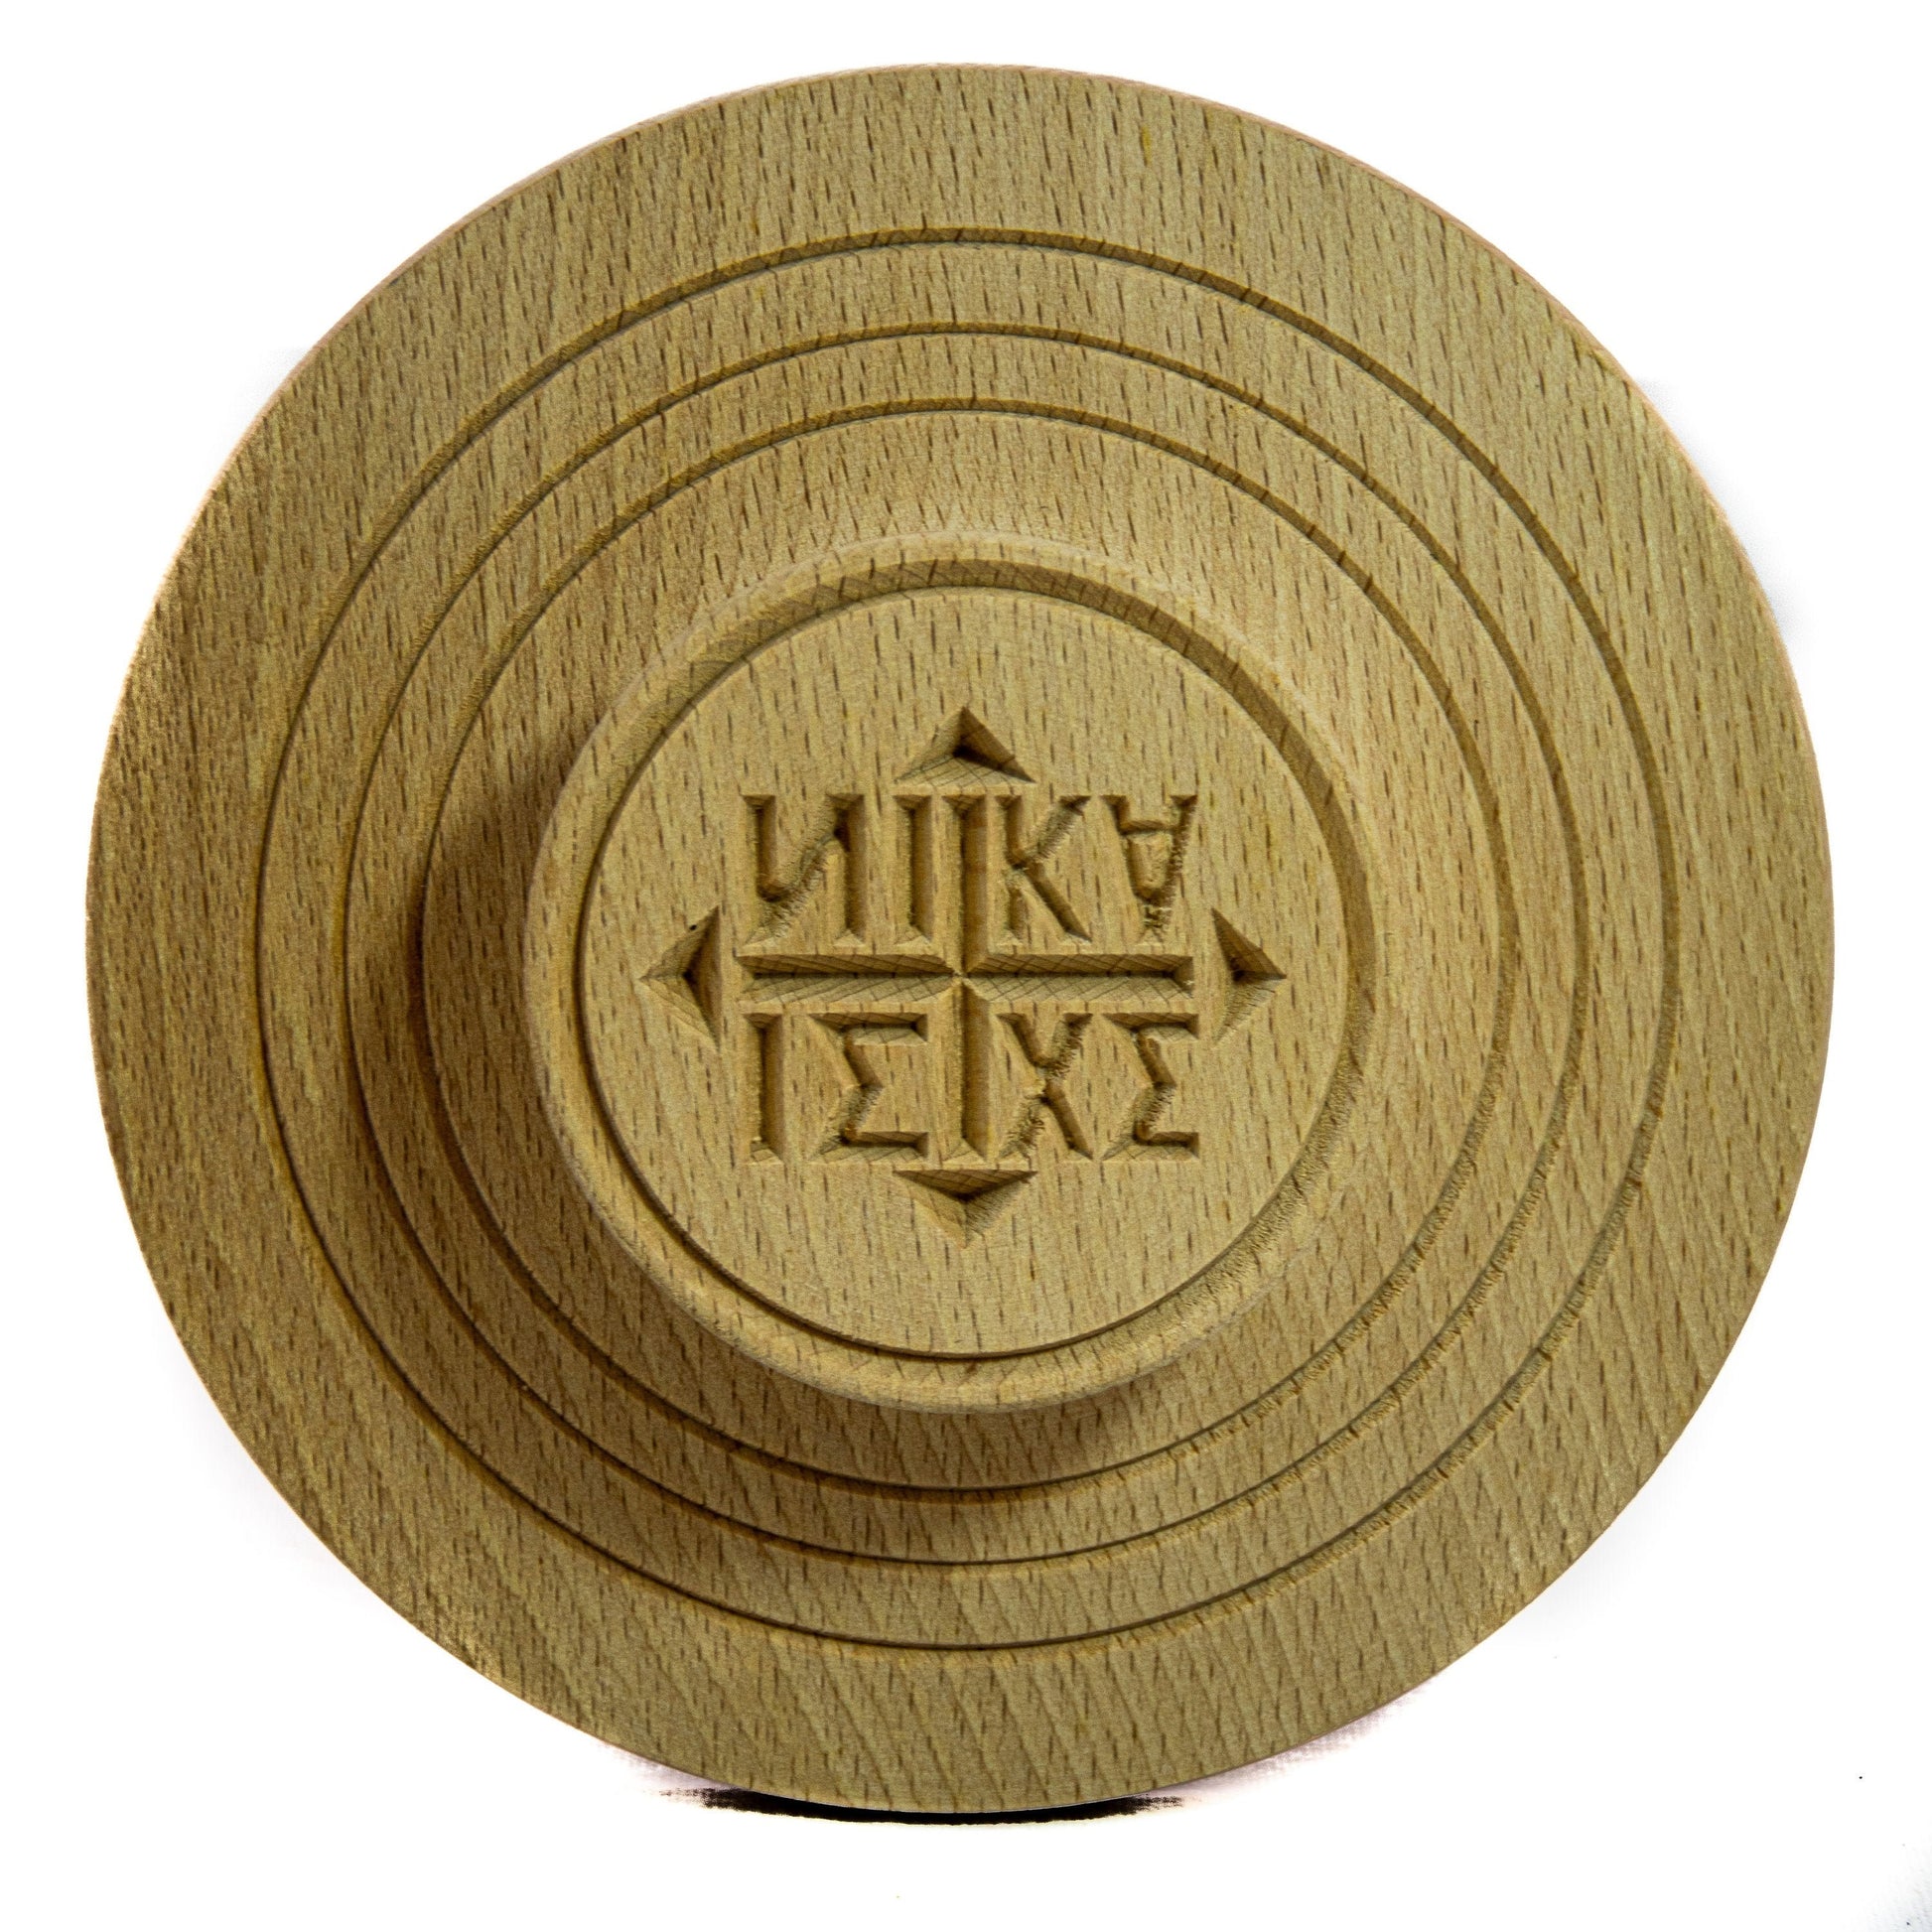 Prosphora Circular Carved Wooden Stamp/Seal for The Holy Bread - Orthodox  Liturgy